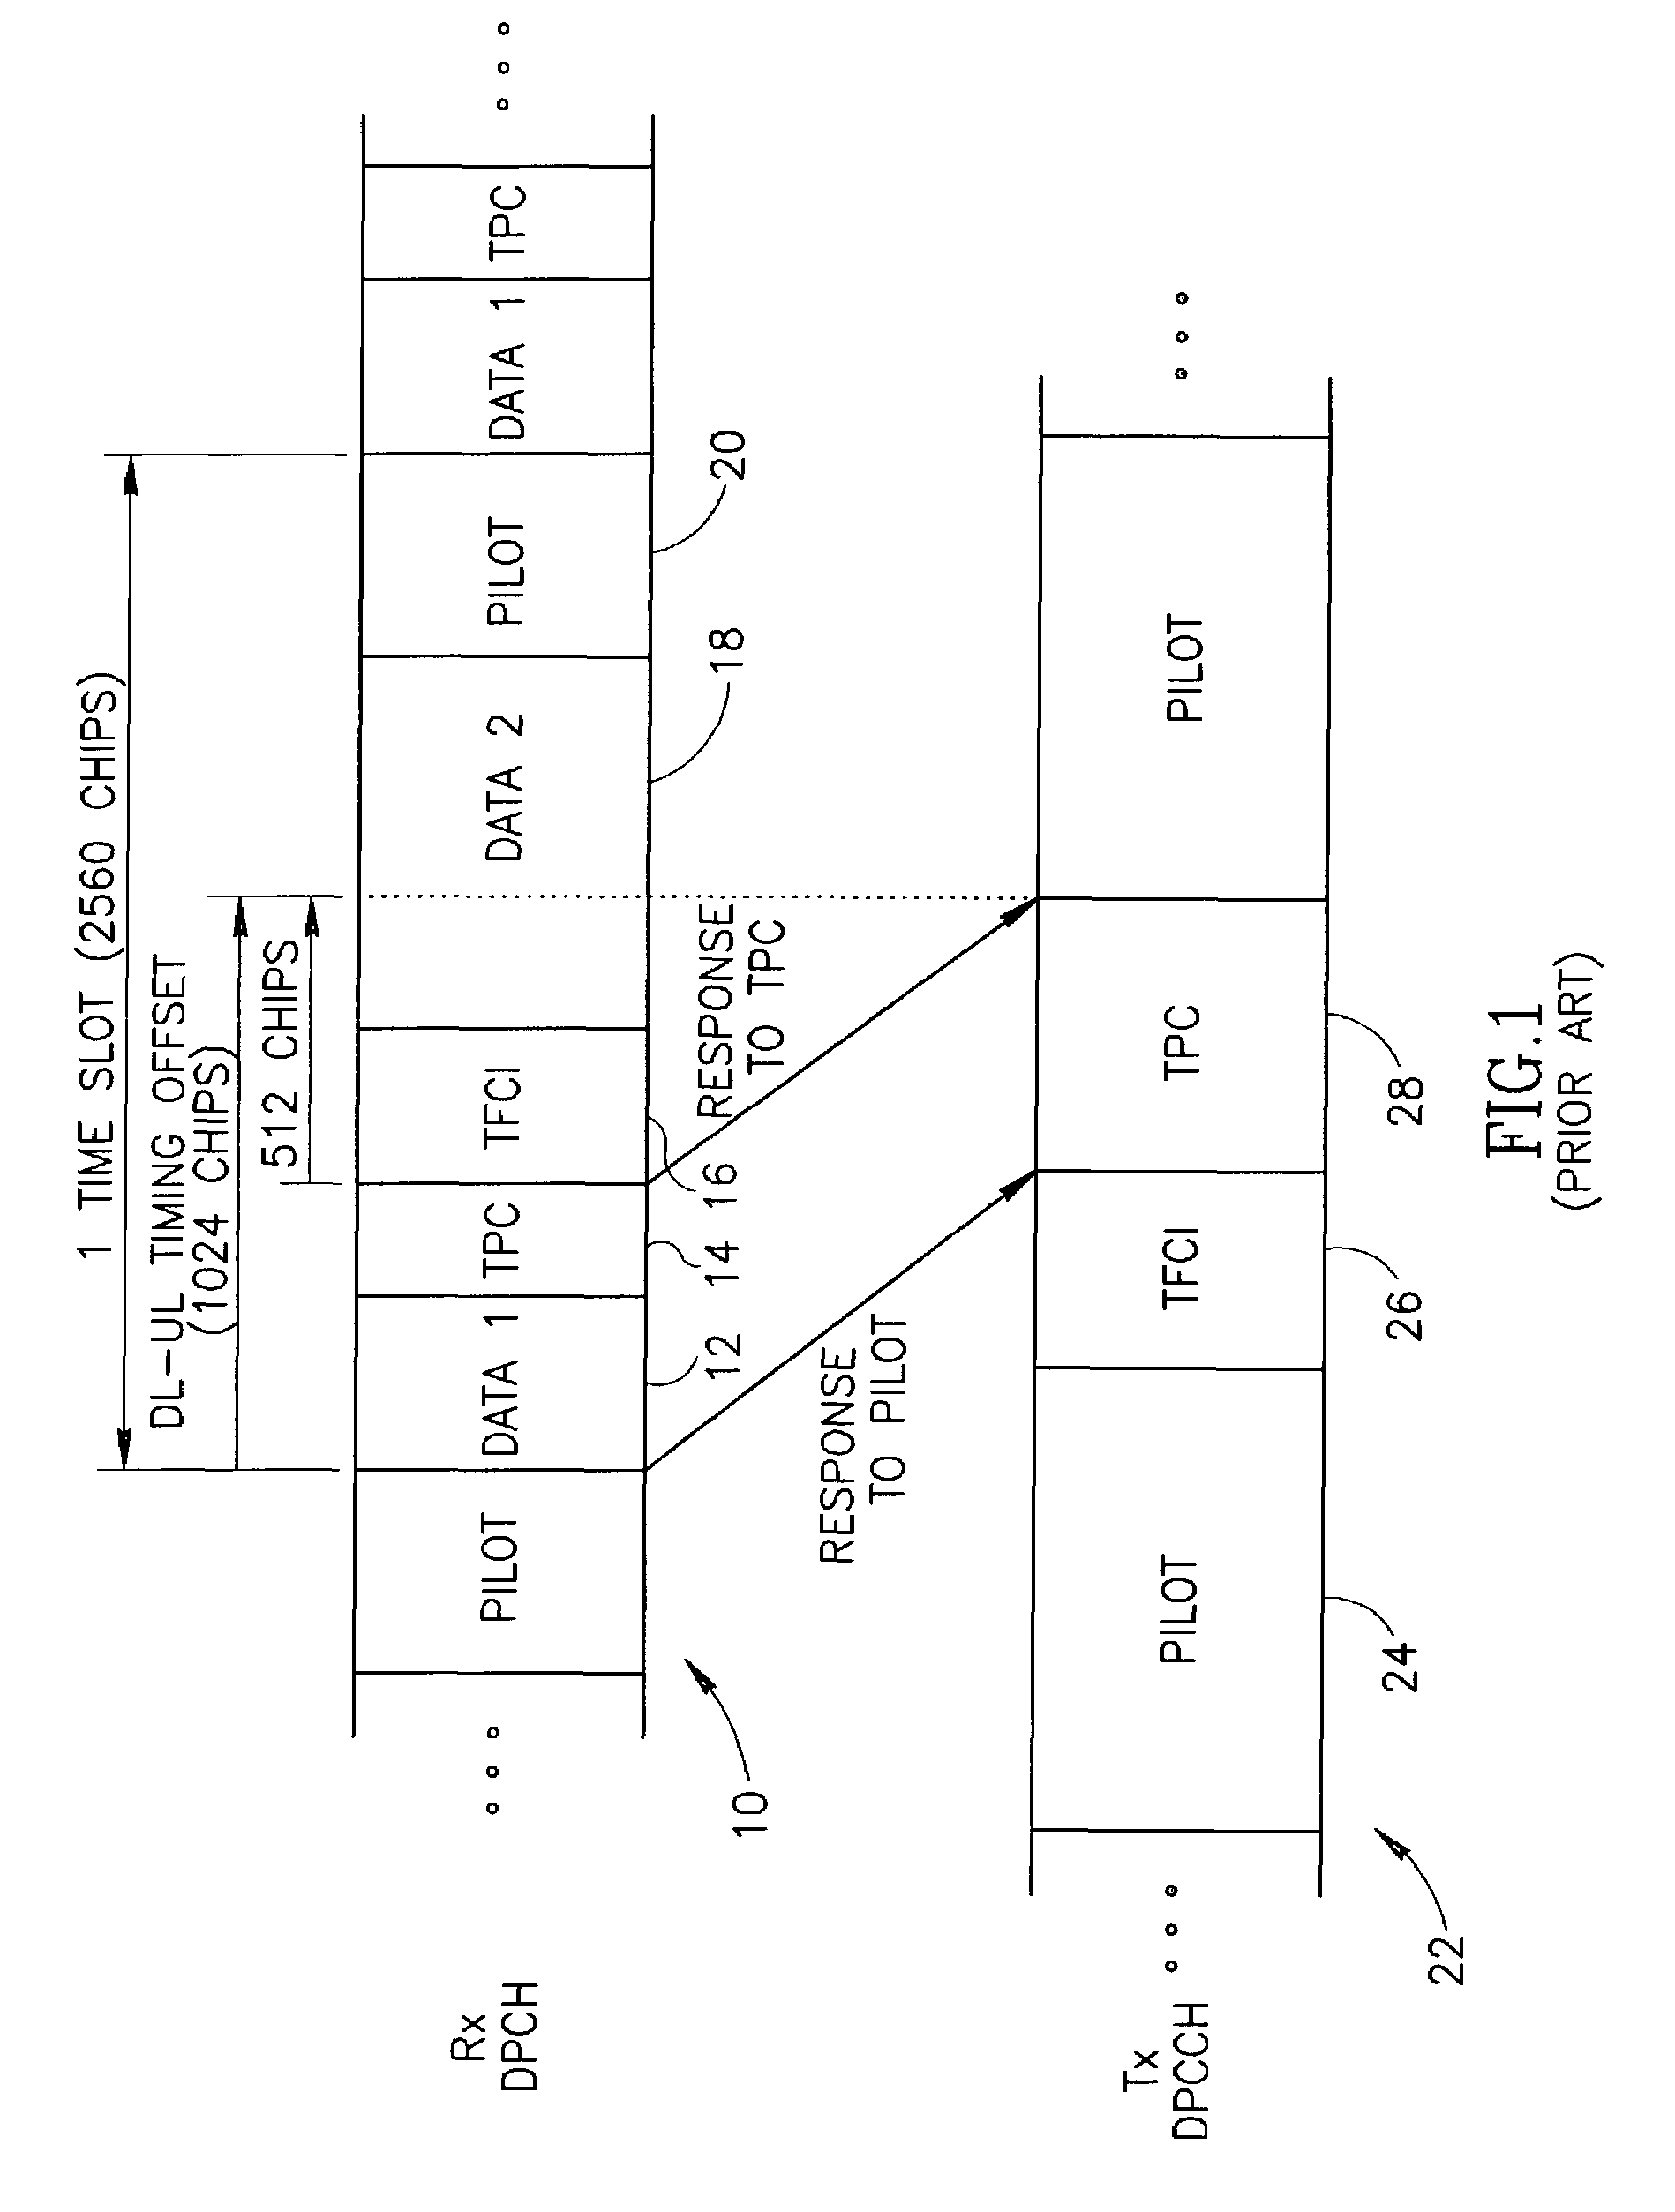 Information transfer and interrupt event scheduling scheme for a communications transceiver incorporating multiple processing elements